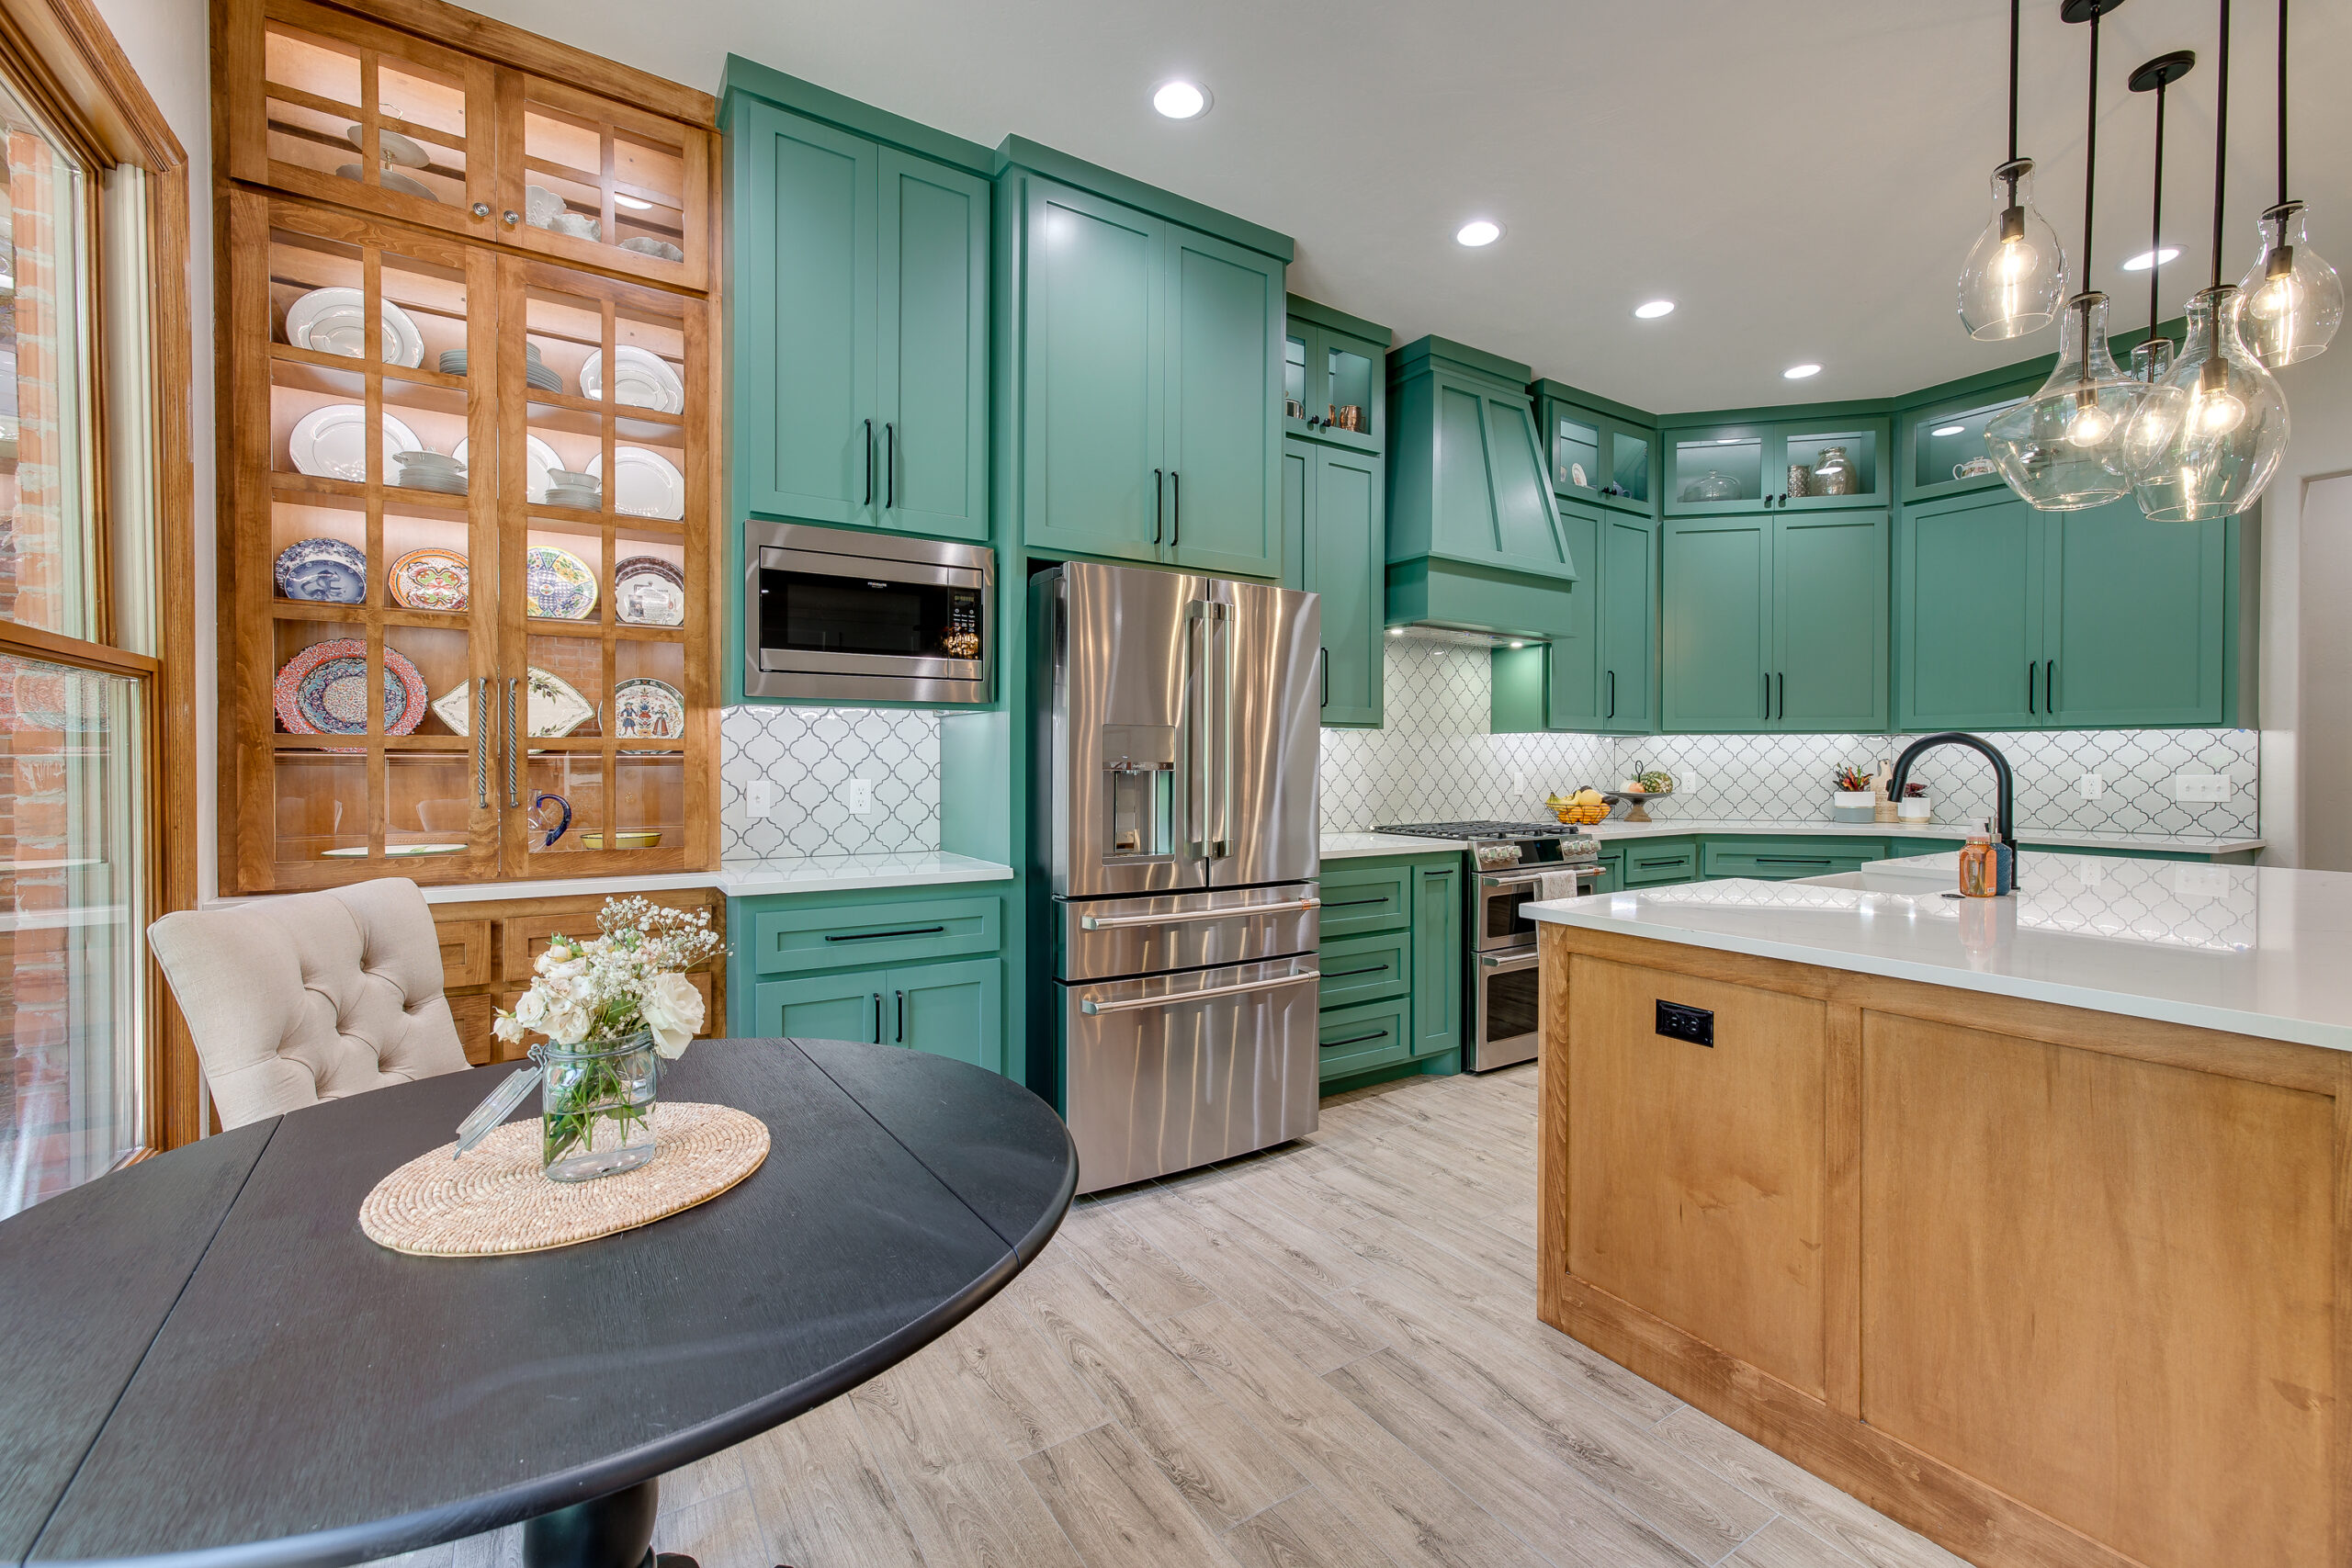 What are the most popular kitchen trends?